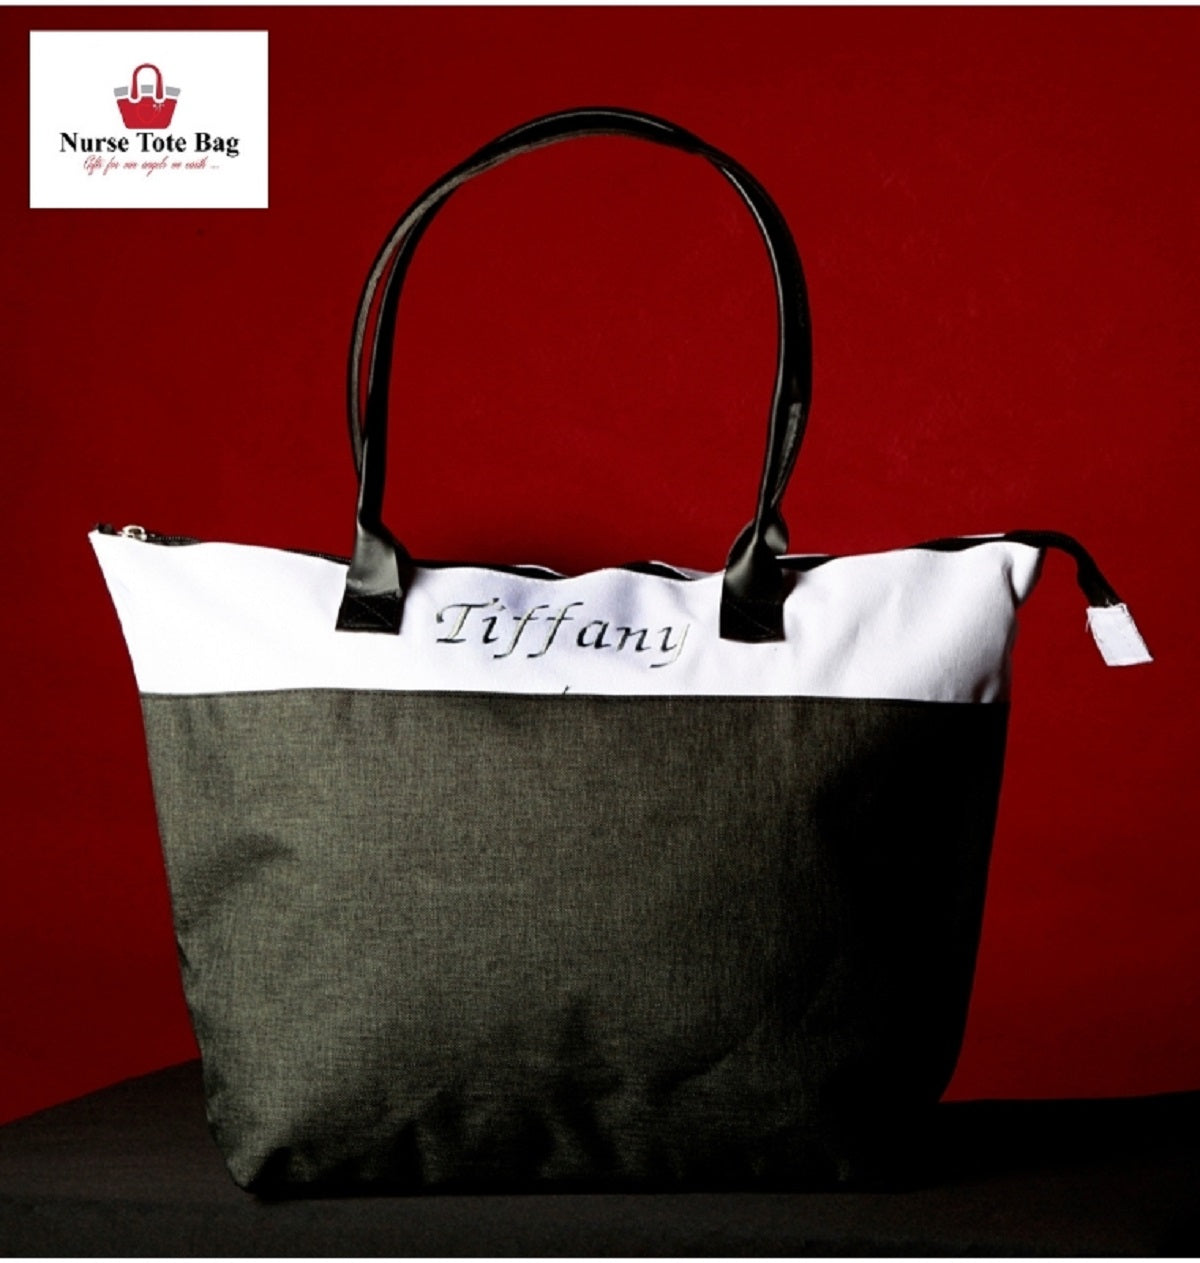 Tote Bag for Women Cute Tote Bags Handbags for women, Large Purse, Bucket Bag, Polycanvas monogrammed bags    customized tote     personalized bag                       personalized tote                                beach bag tote fendi tote work tote personalized tote bags personalised bags cute tote bags fendi tote bag black tote bag blue tote bag Purple tote bag gray tote bag grey tote bag tan tote bag brown tote bag